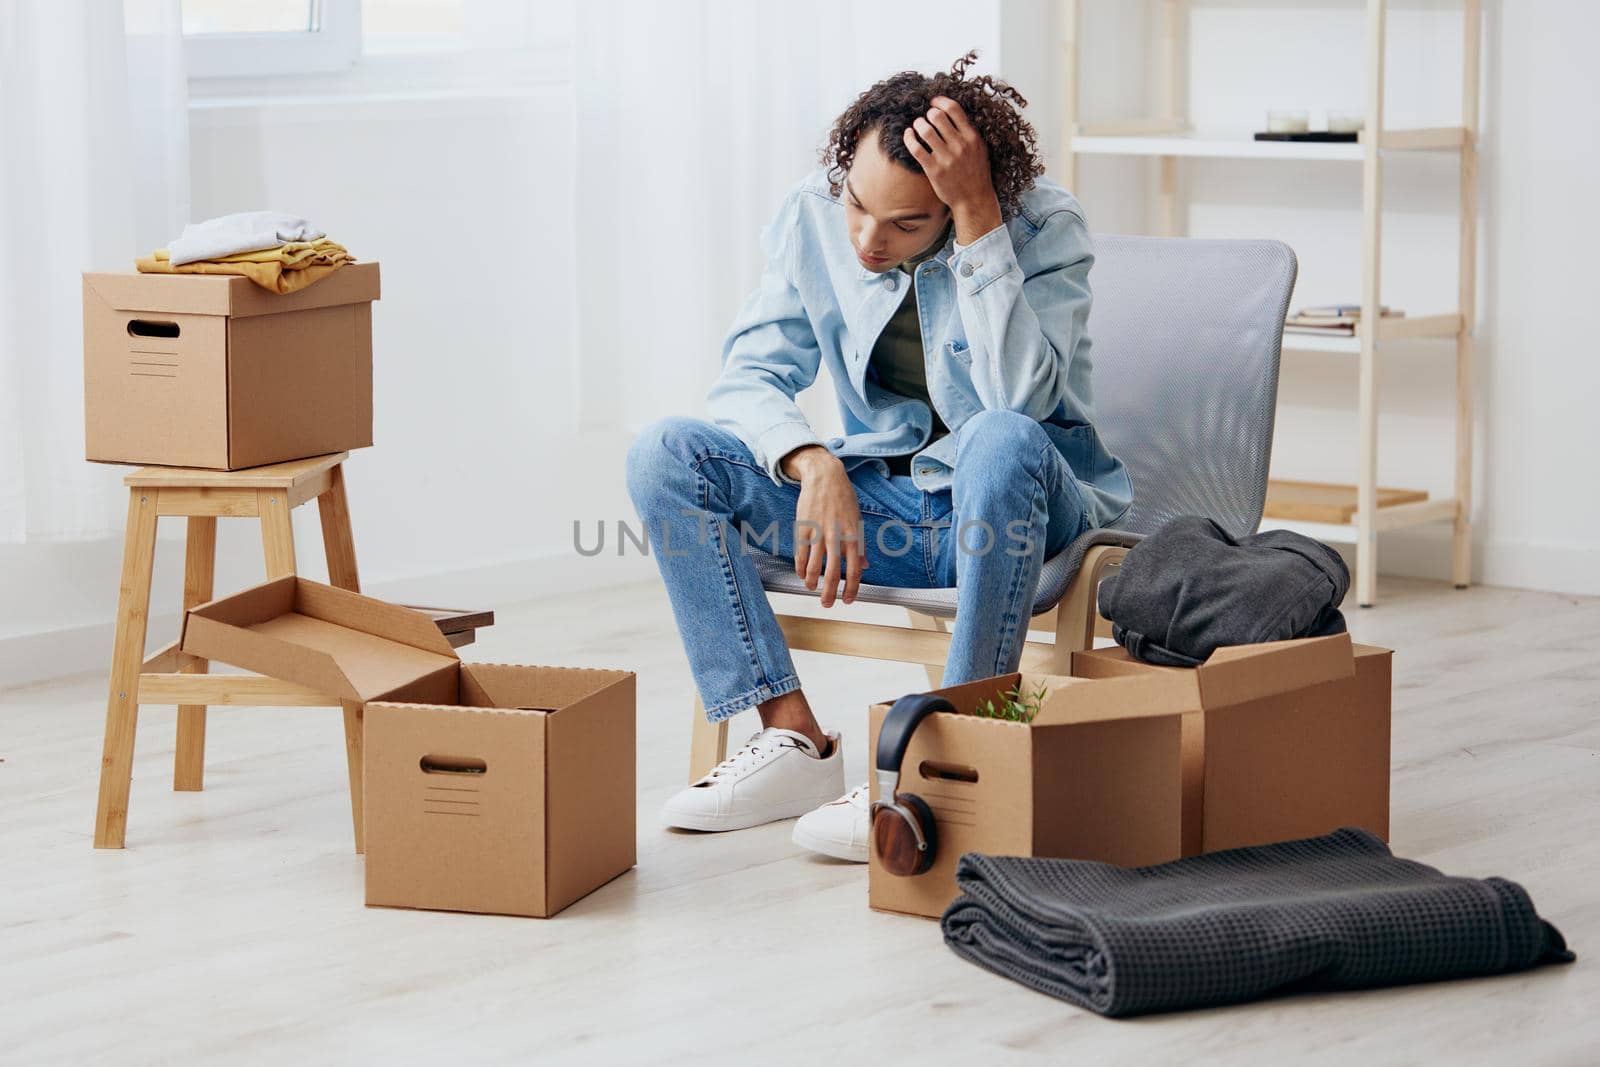 guy with curly hair sitting on a chair unpacking with box in hand moving Lifestyle by SHOTPRIME